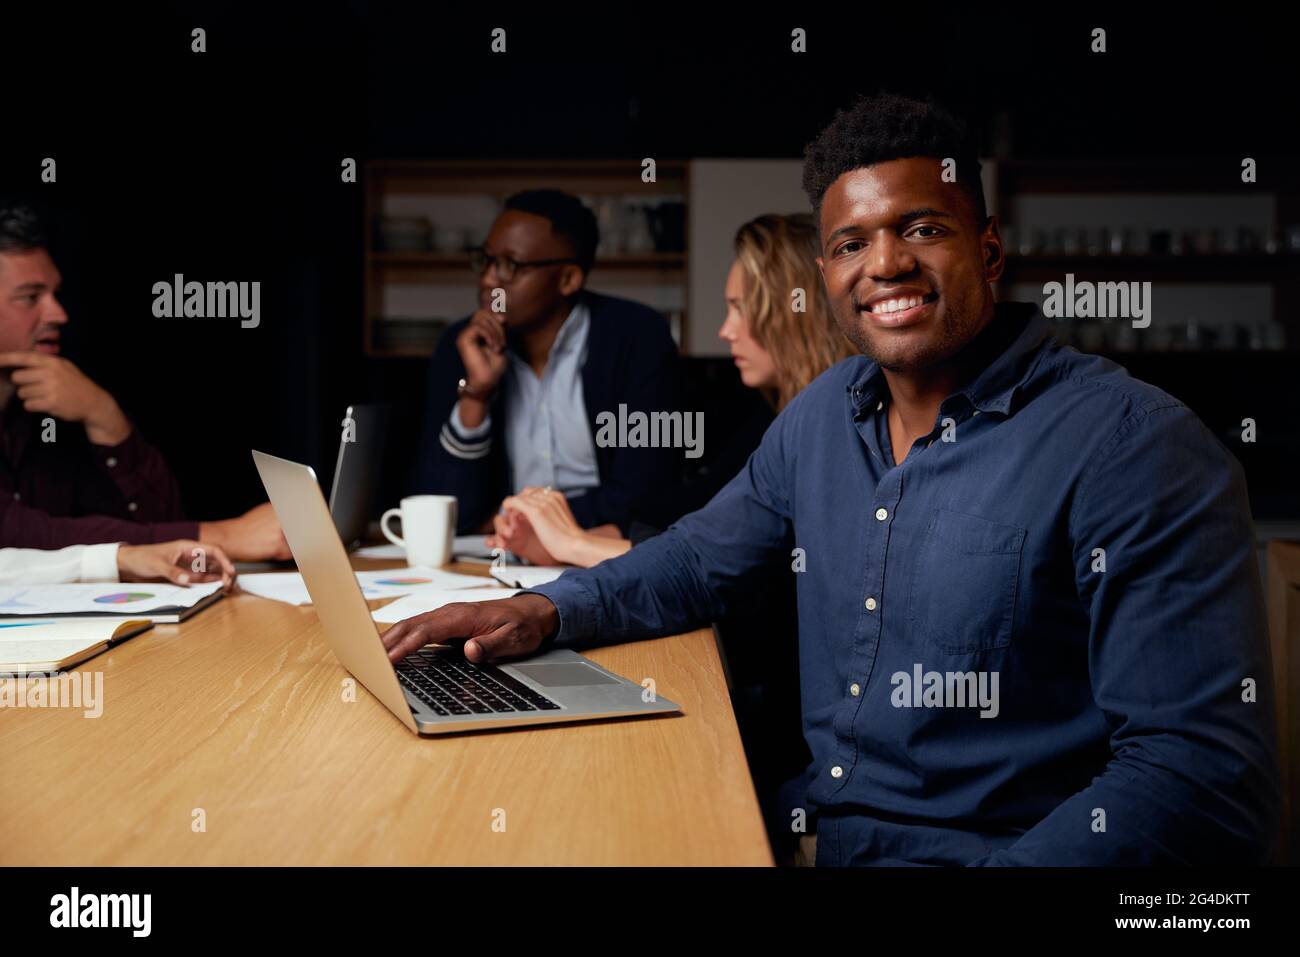 Portrait of smiling young african male team leader with laptop looking at camera while his colleague discussing project at background Stock Photo